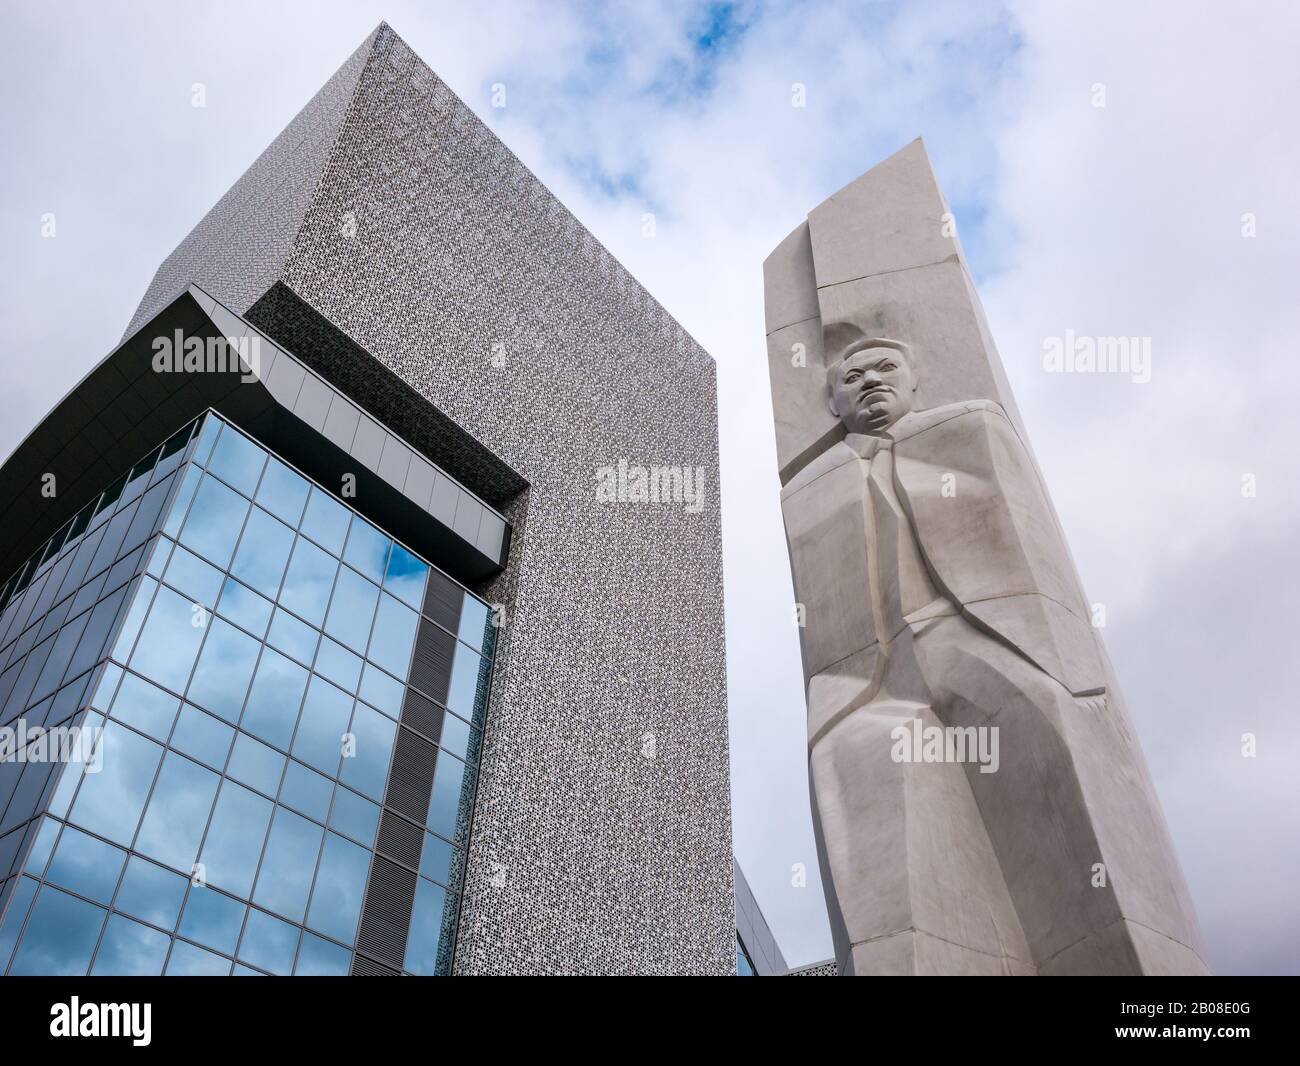 The Emblem Above the Entrance To the Zapsibkombank Building in the City of  Nadym in Northern Siberia Editorial Stock Photo - Image of autonomous,  economic: 179827728